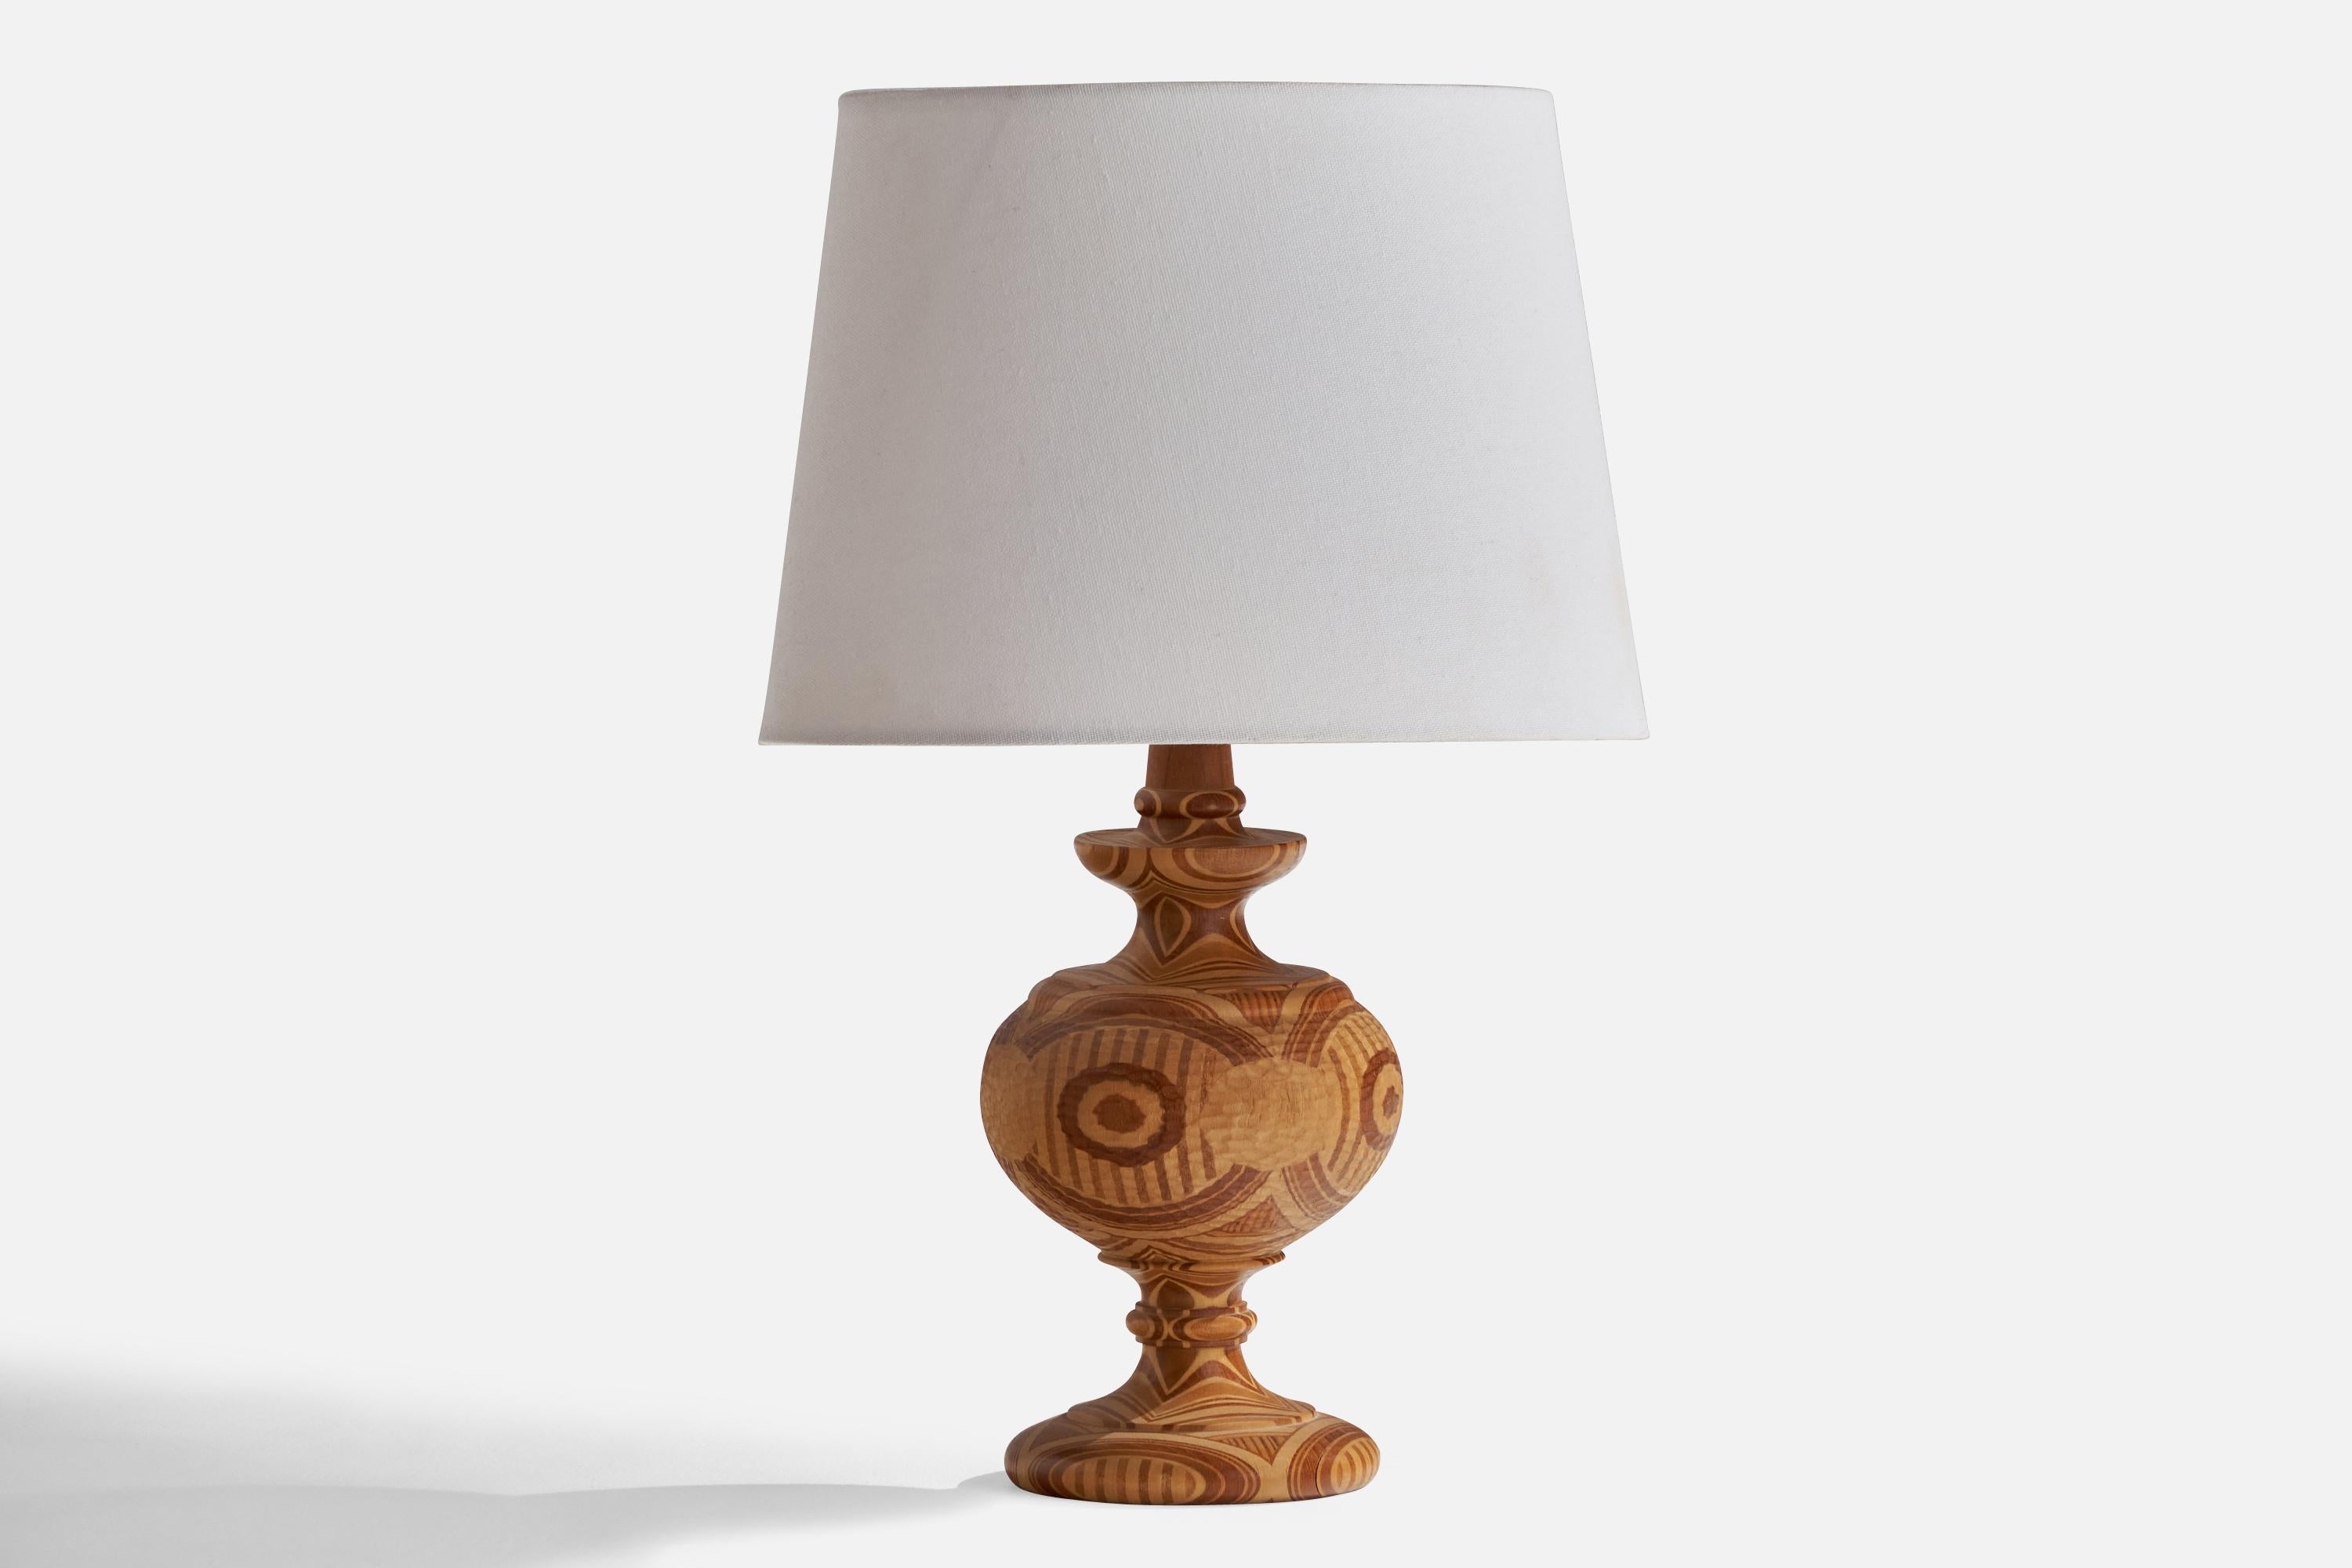 A stack-laminated mixed woods table lamp designed and produced in Sweden, 1967.

Dimensions of Lamp (inches): 10.5” H x 4.75” Diameter
Dimensions of Shade (inches): 8” Top Diameter x 9.75” Bottom Diameter x 7.25” H
Dimensions of Lamp with Shade